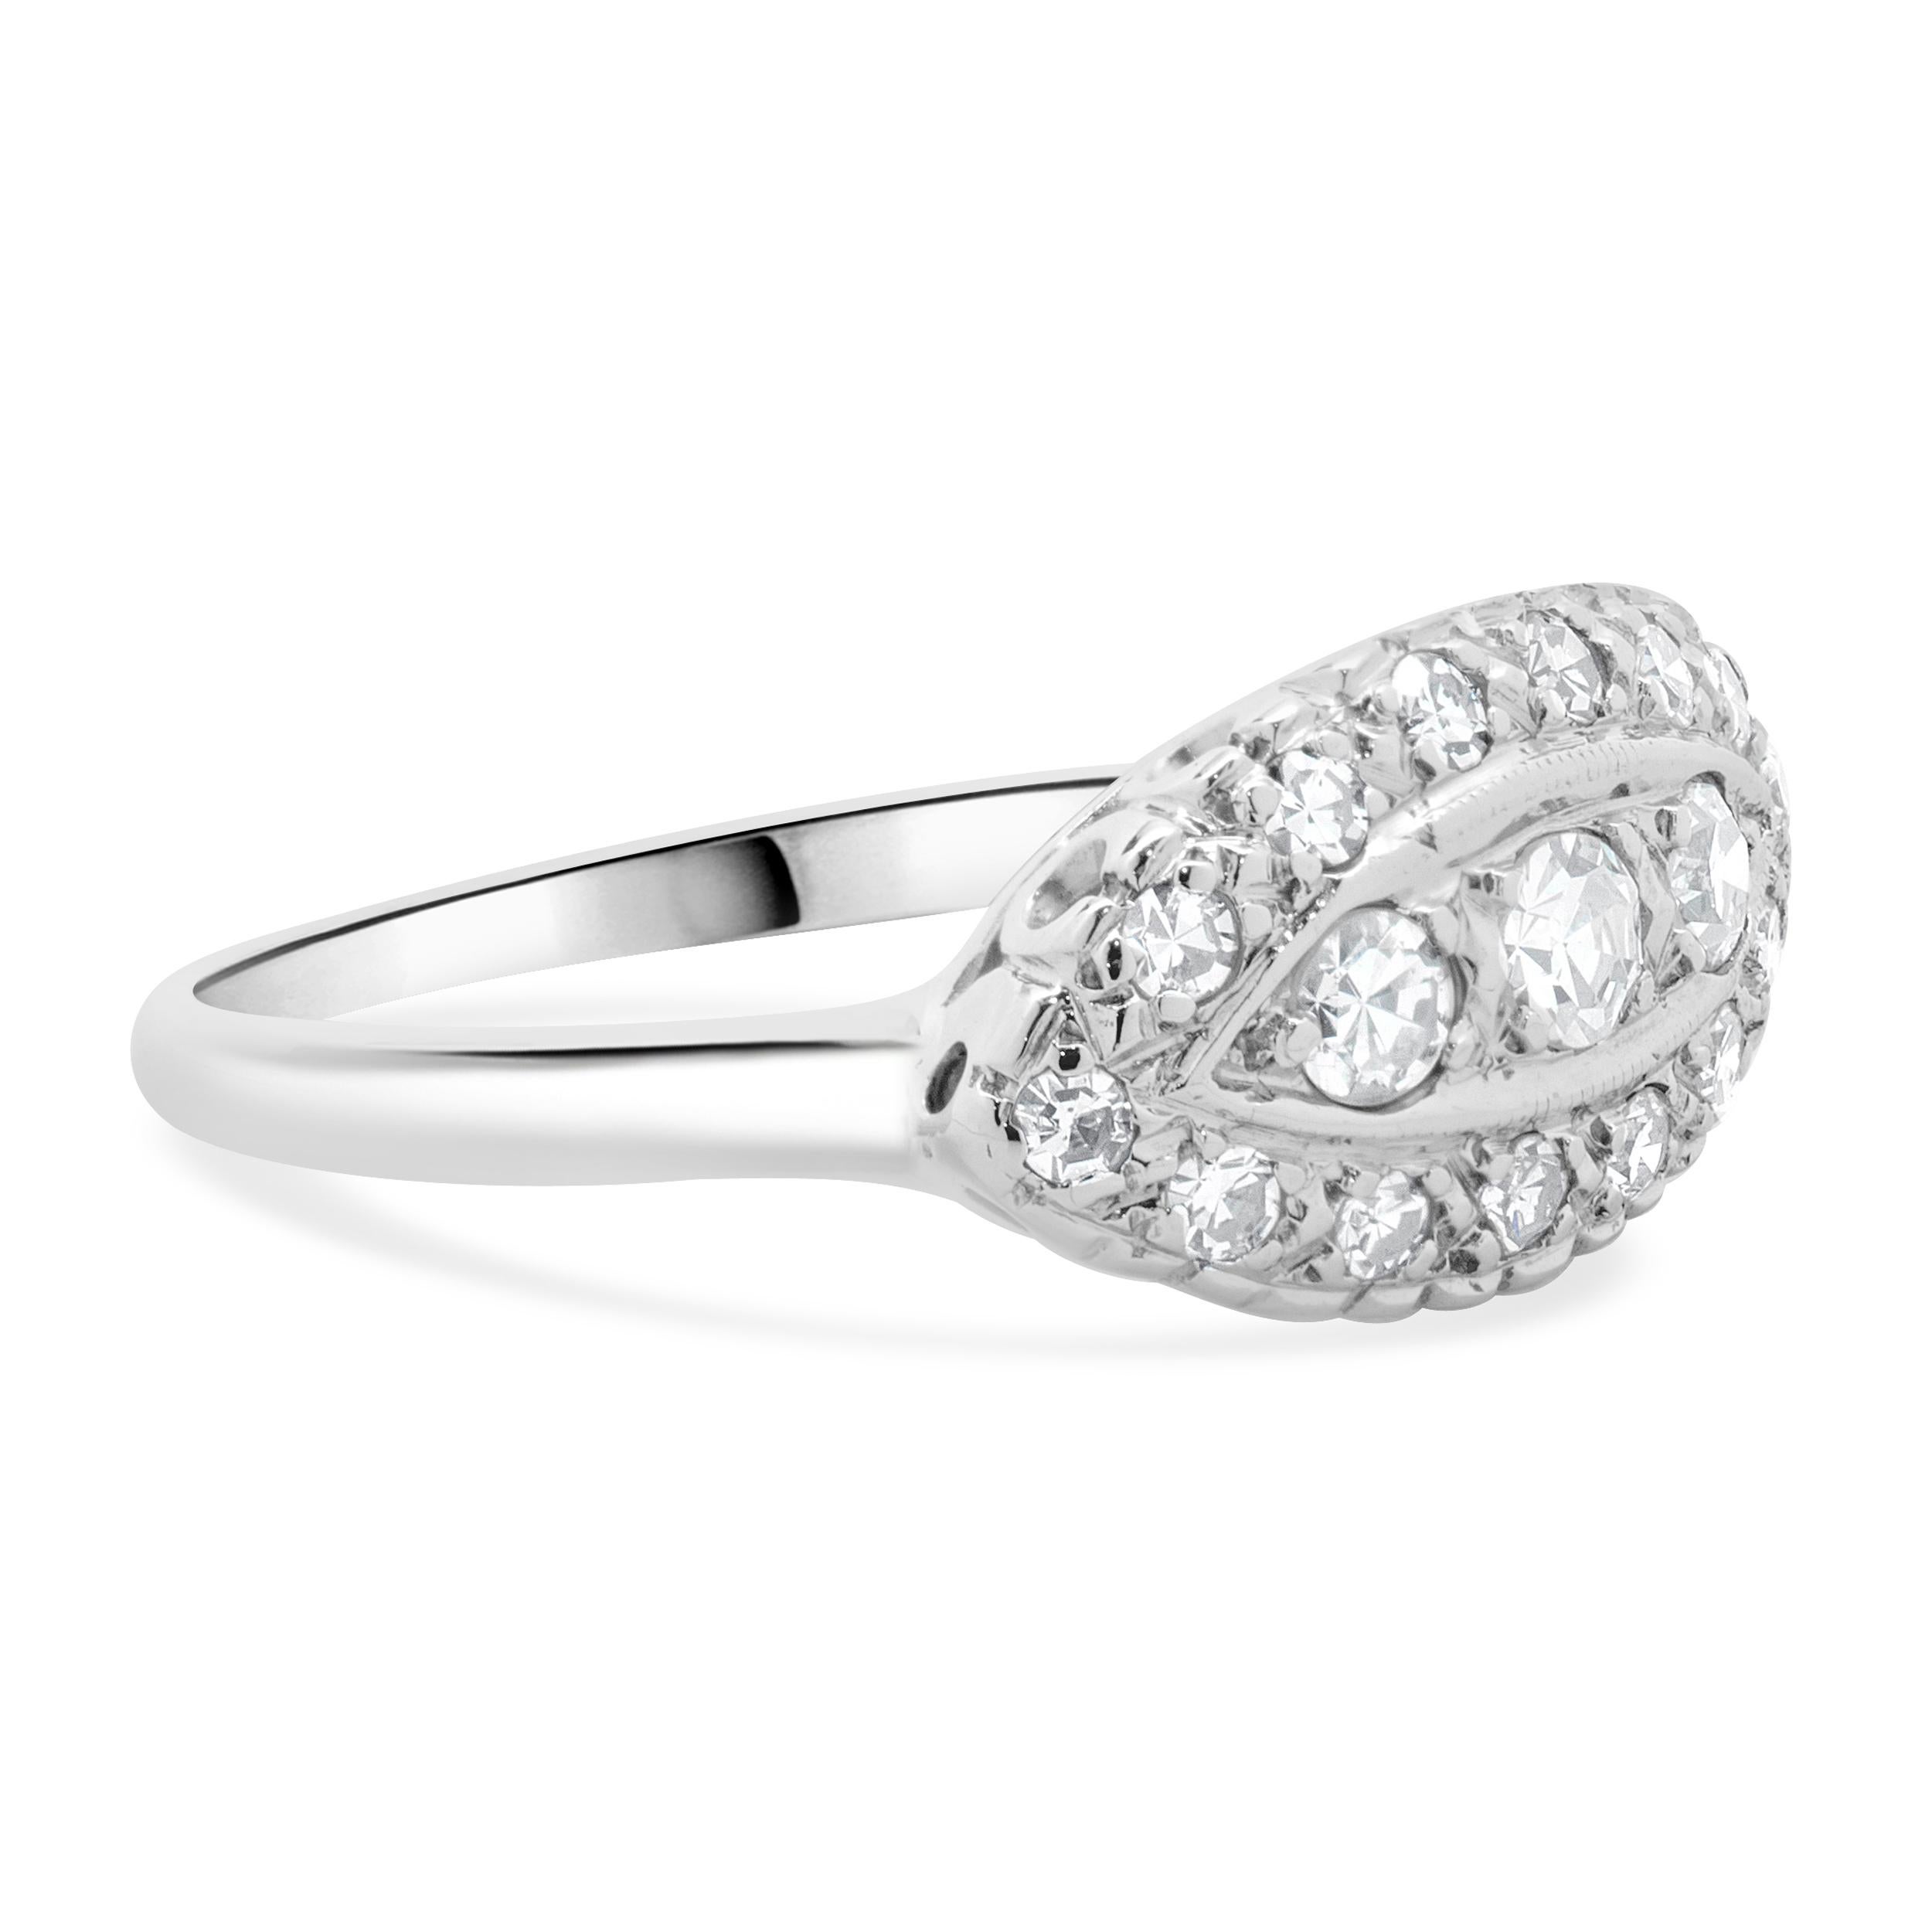 Designer: custom
Material: 14K white gold
Diamond: 17 round single cut = 0.25cttw
Color: G 
Clarity: VS2
Size: 6.5 sizing available 
Weight: 2.33 grams
